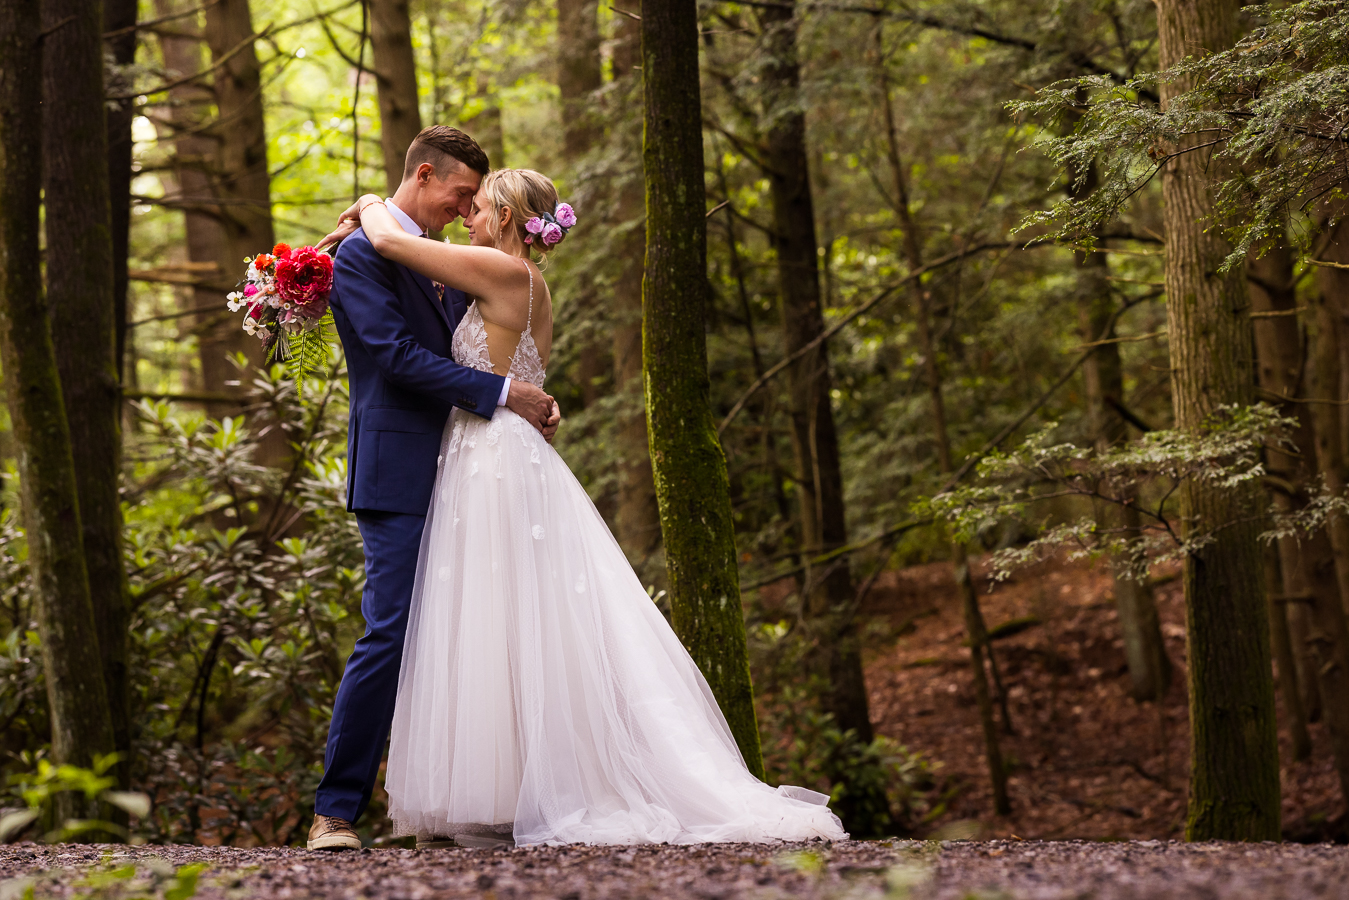 jim thorpe wedding photographer, lisa rhinehart, captures this traditional image of the bride and groom hugging one another as their heads touch during their romantic portraits before their micro wedding ceremony on a hiking trail 